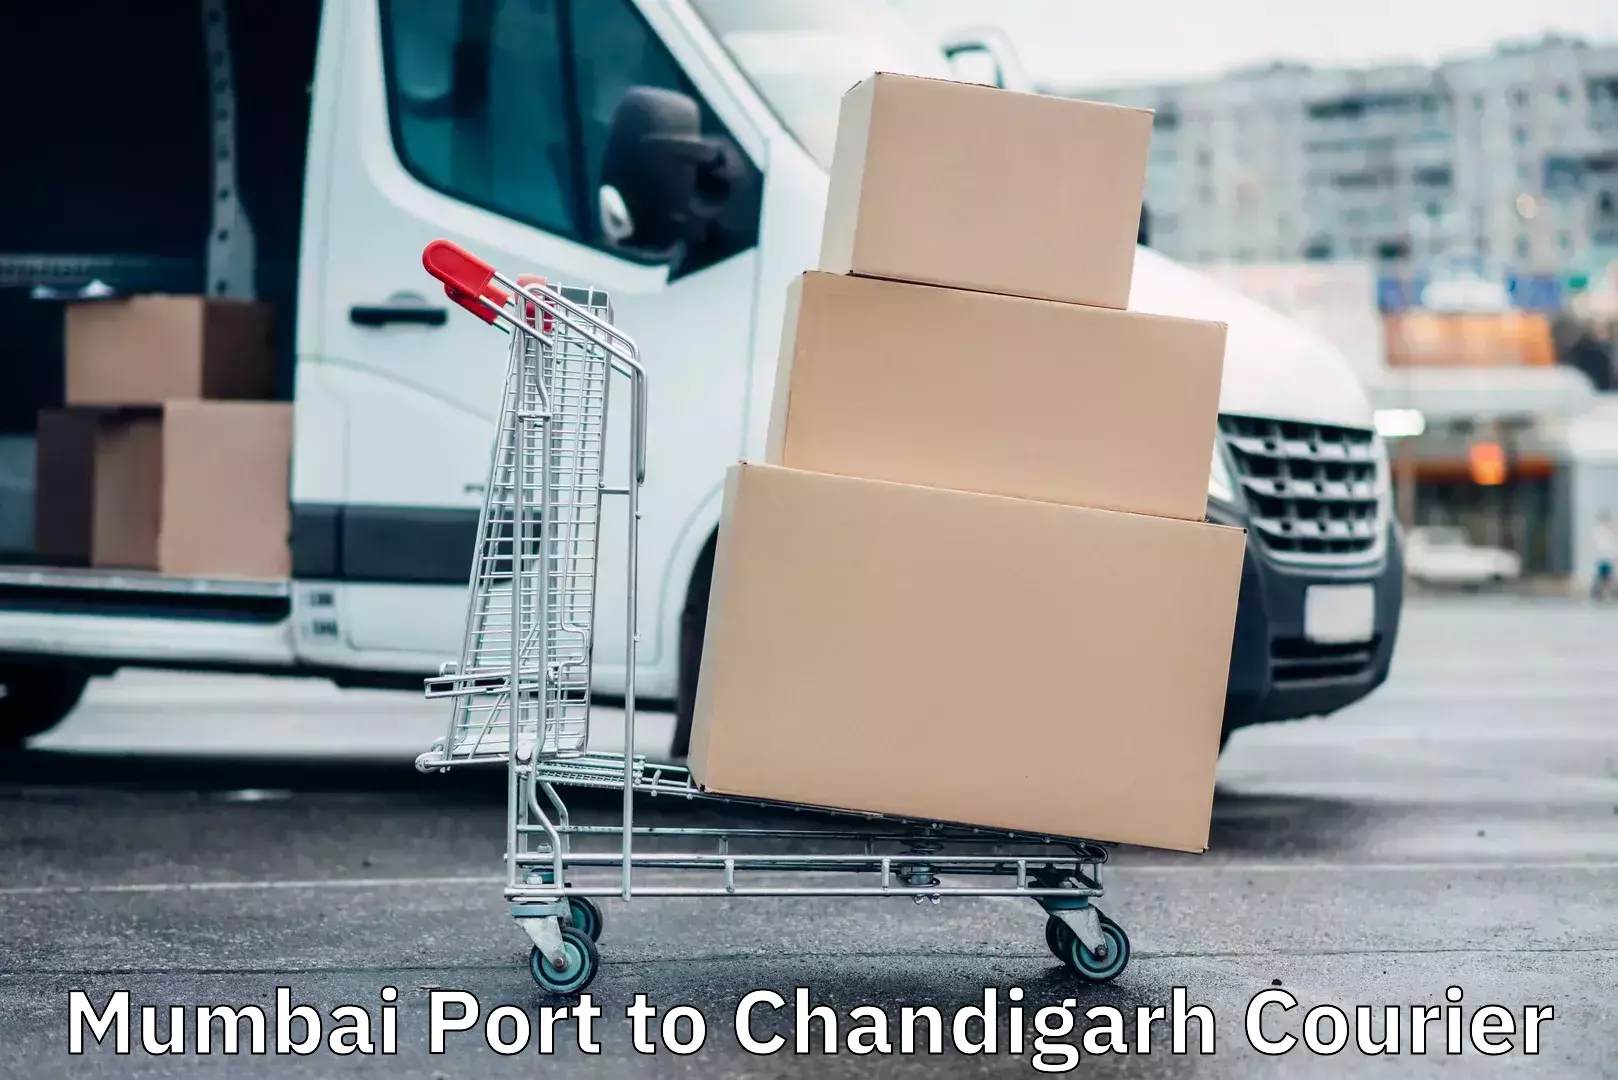 Long distance courier Mumbai Port to Chandigarh